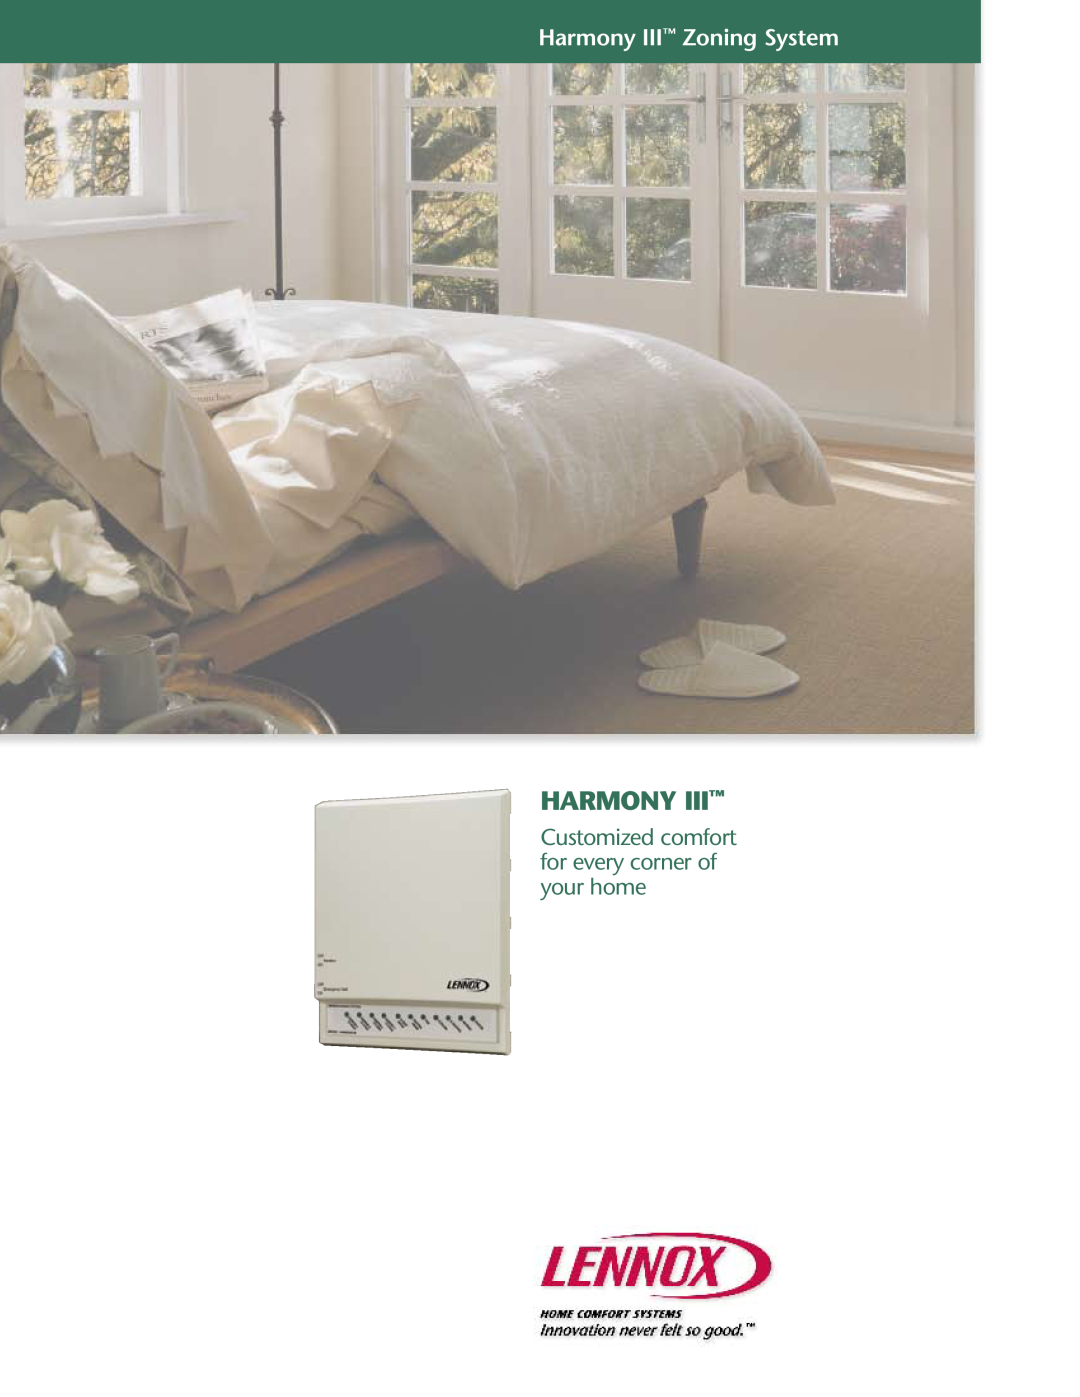 Lenoxx Electronics manual Customized comfort for every corner of your home, Harmony III Zoning System 